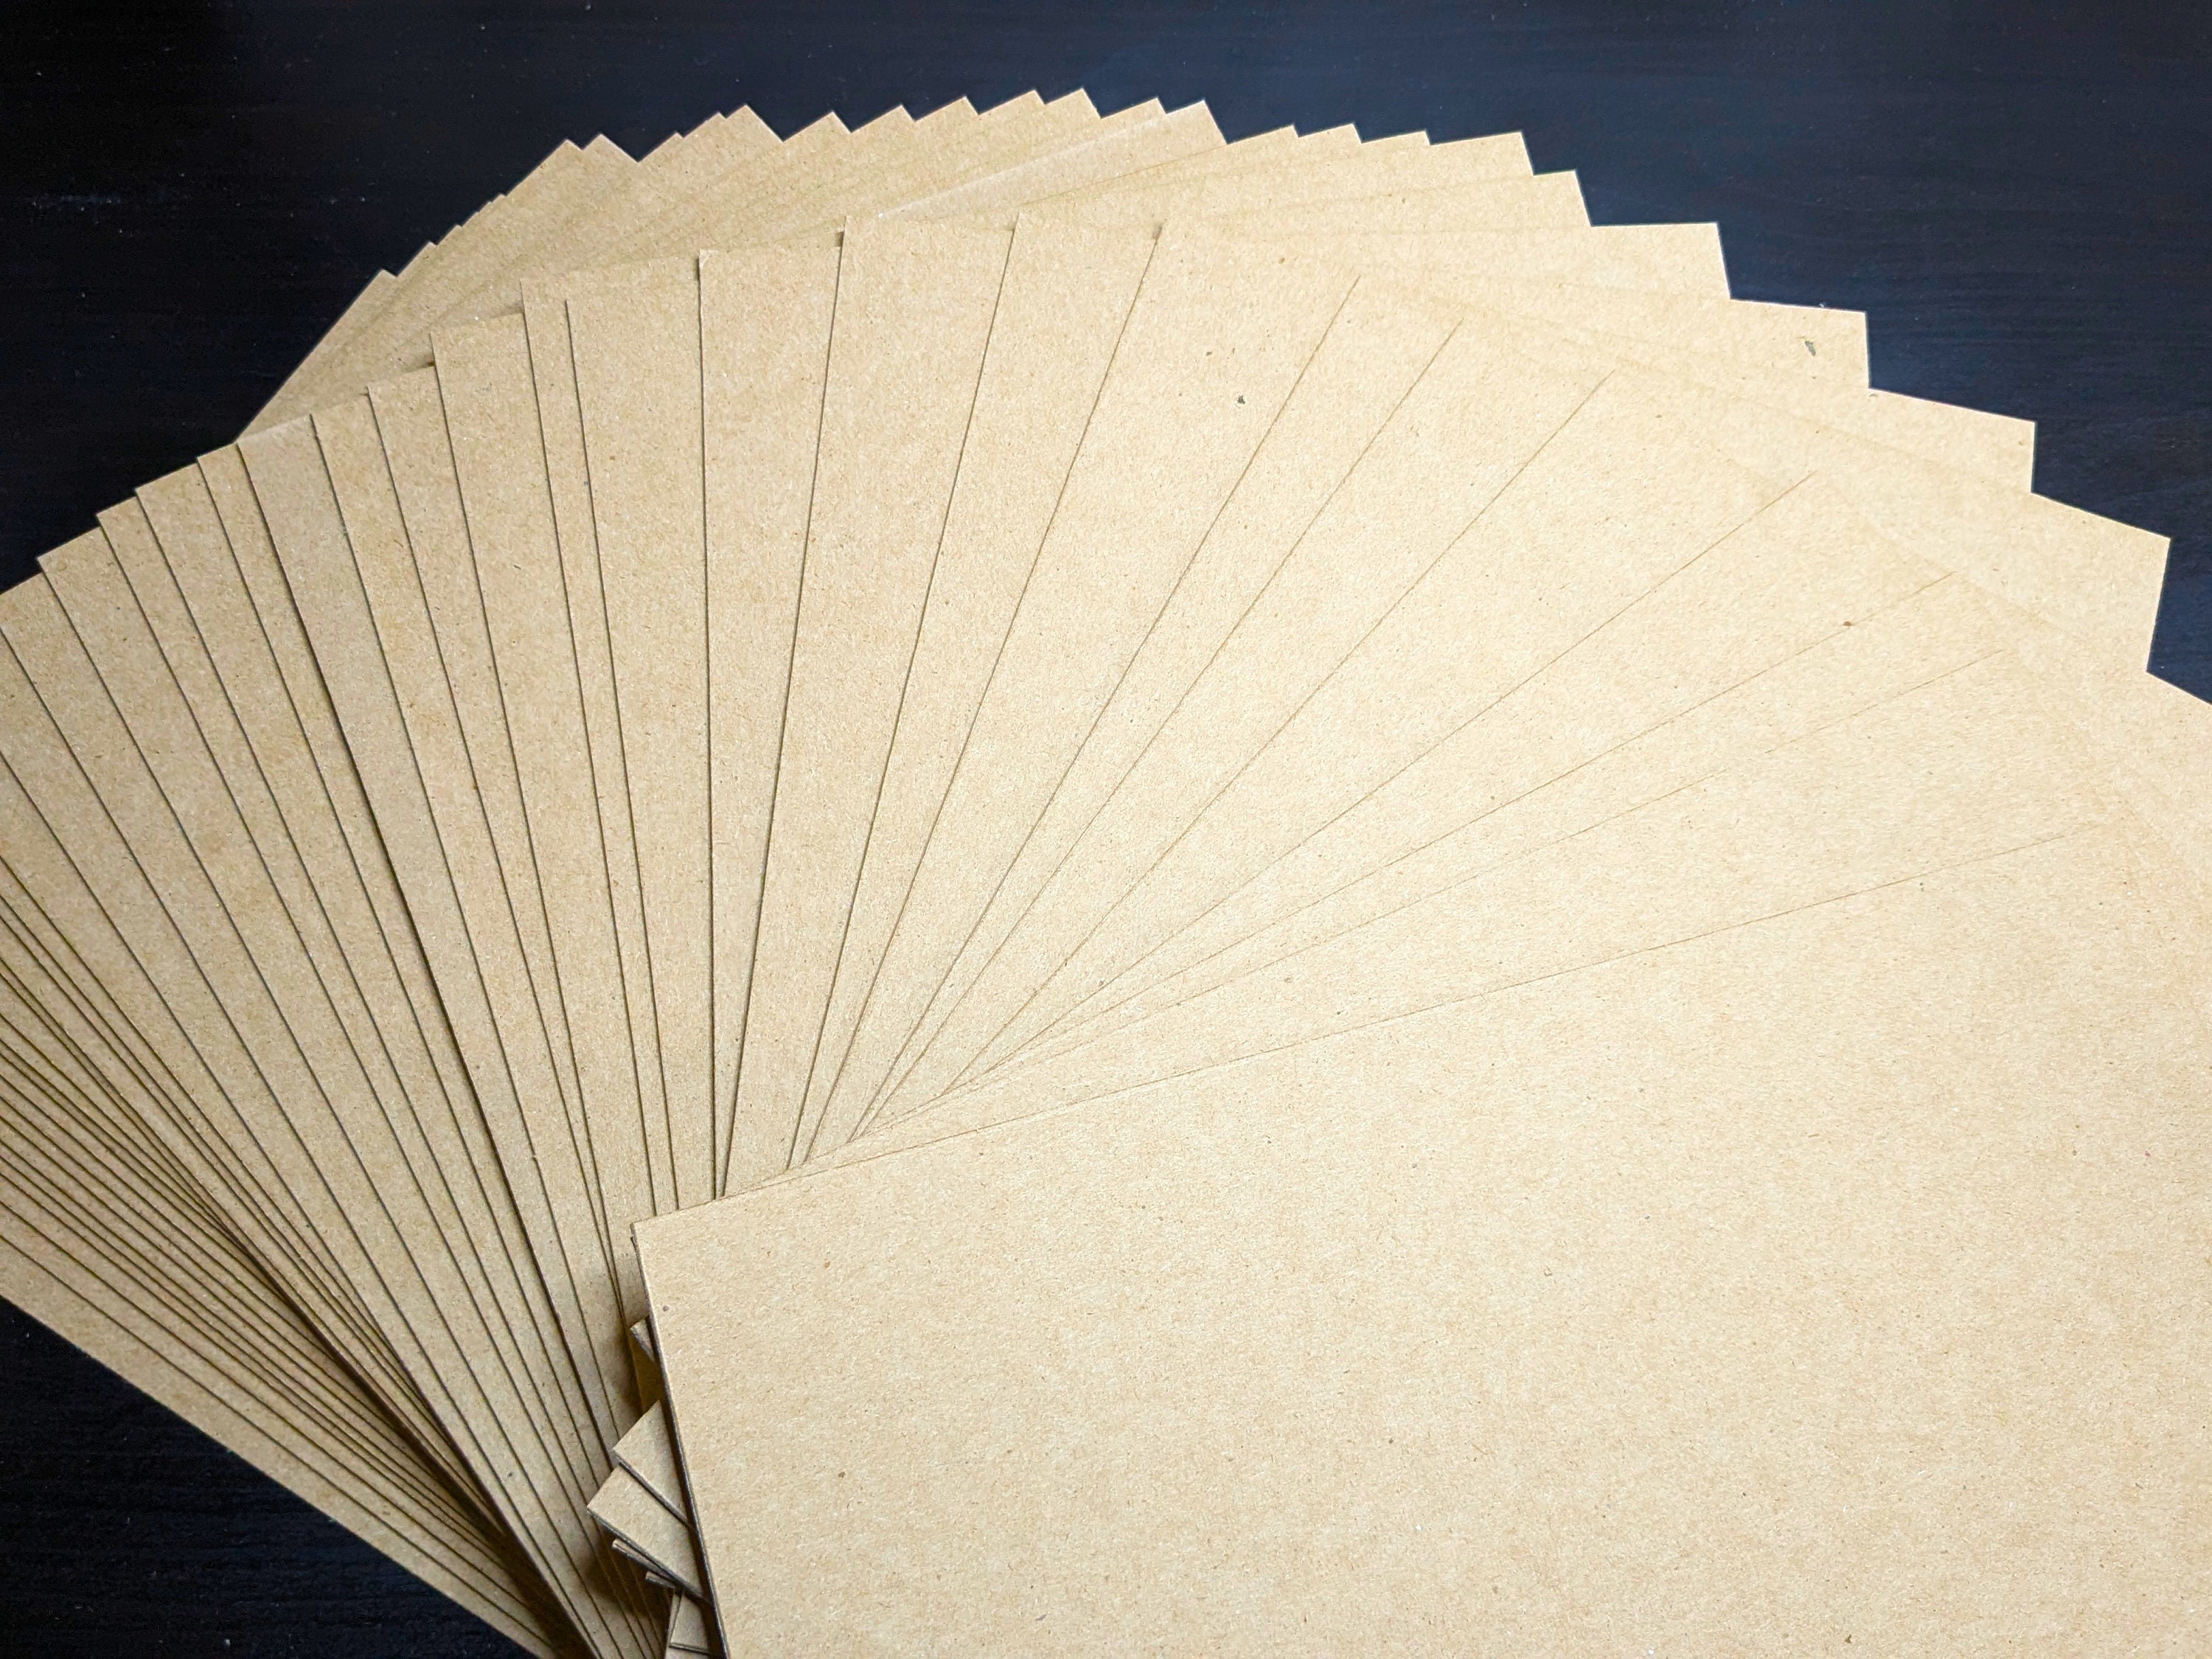 8 1/2 x 11 White Chipboard Sheets (.022 Thick)